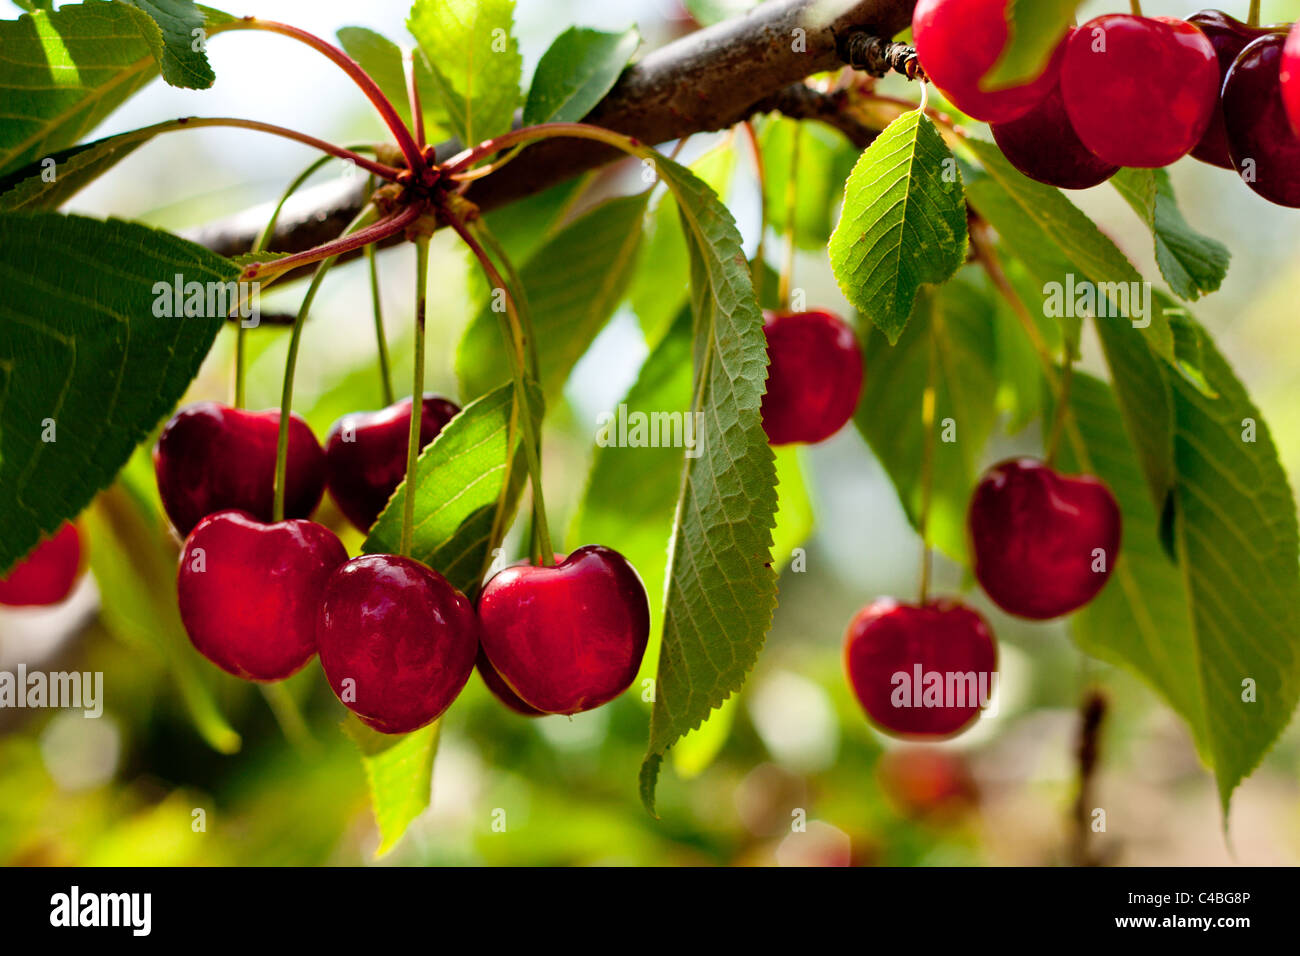 Cherries on a Branch Stock Photo